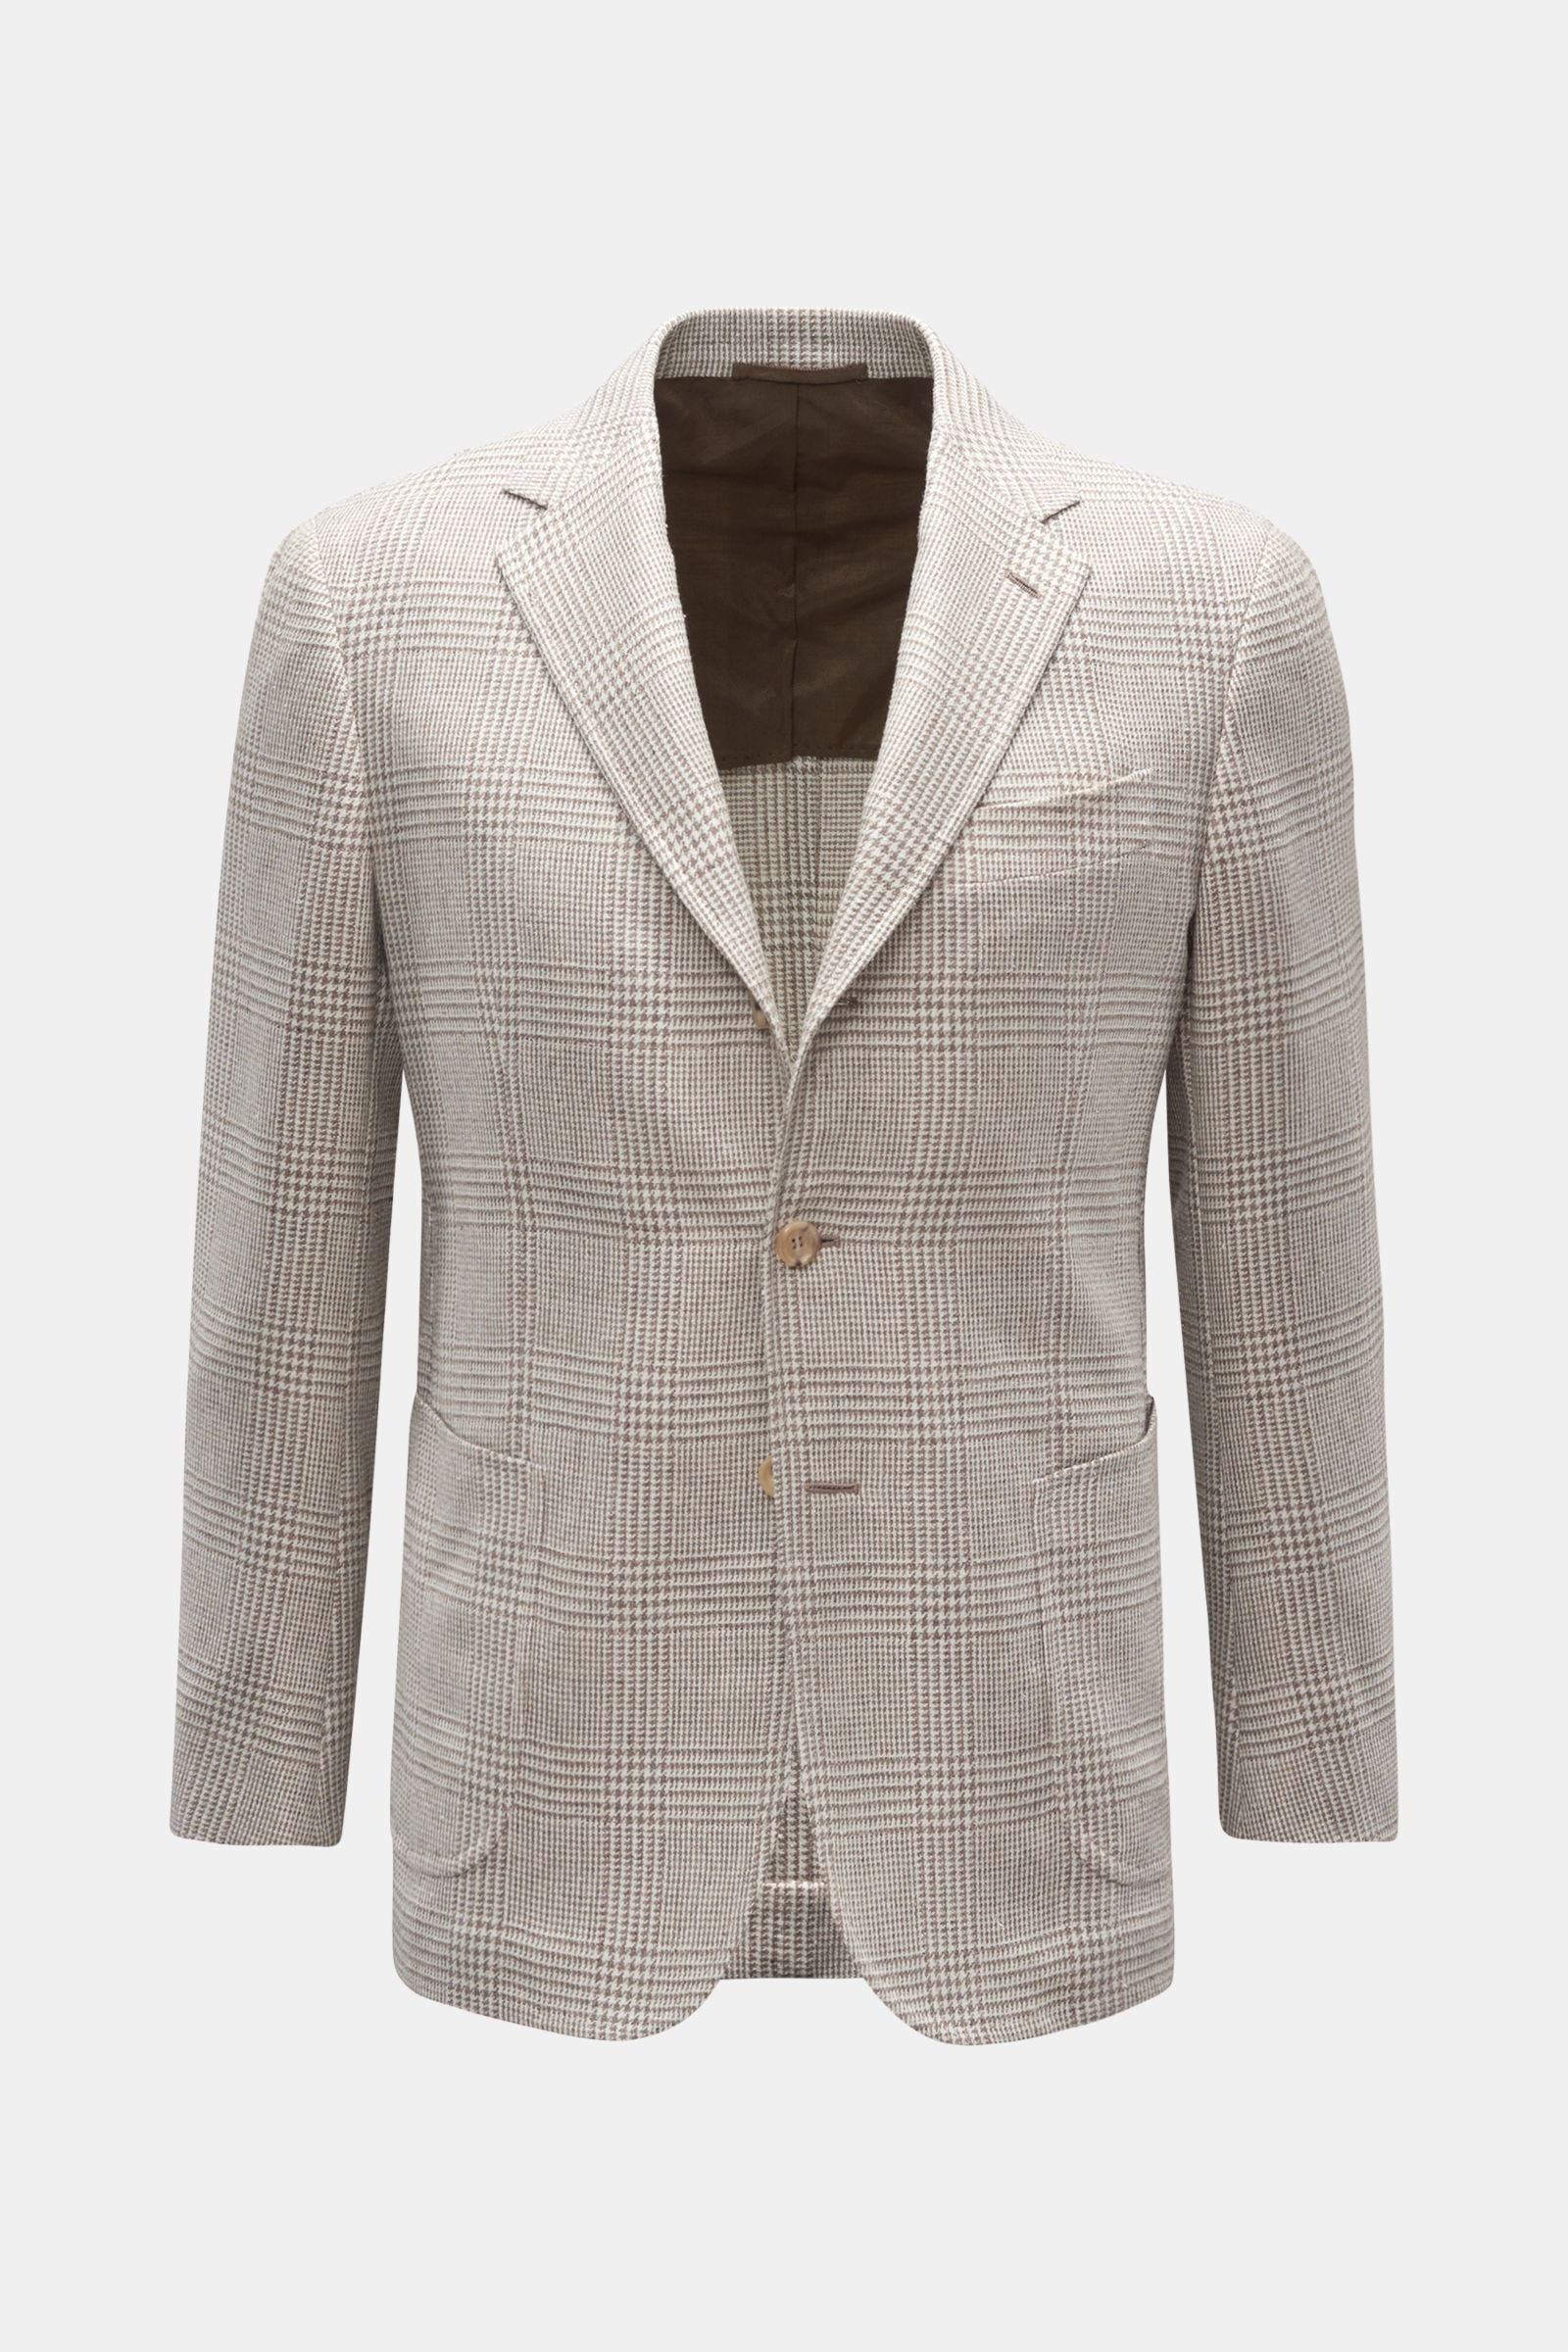 Smart-casual jacket 'Guvincenzo' cream/grey-brown checked